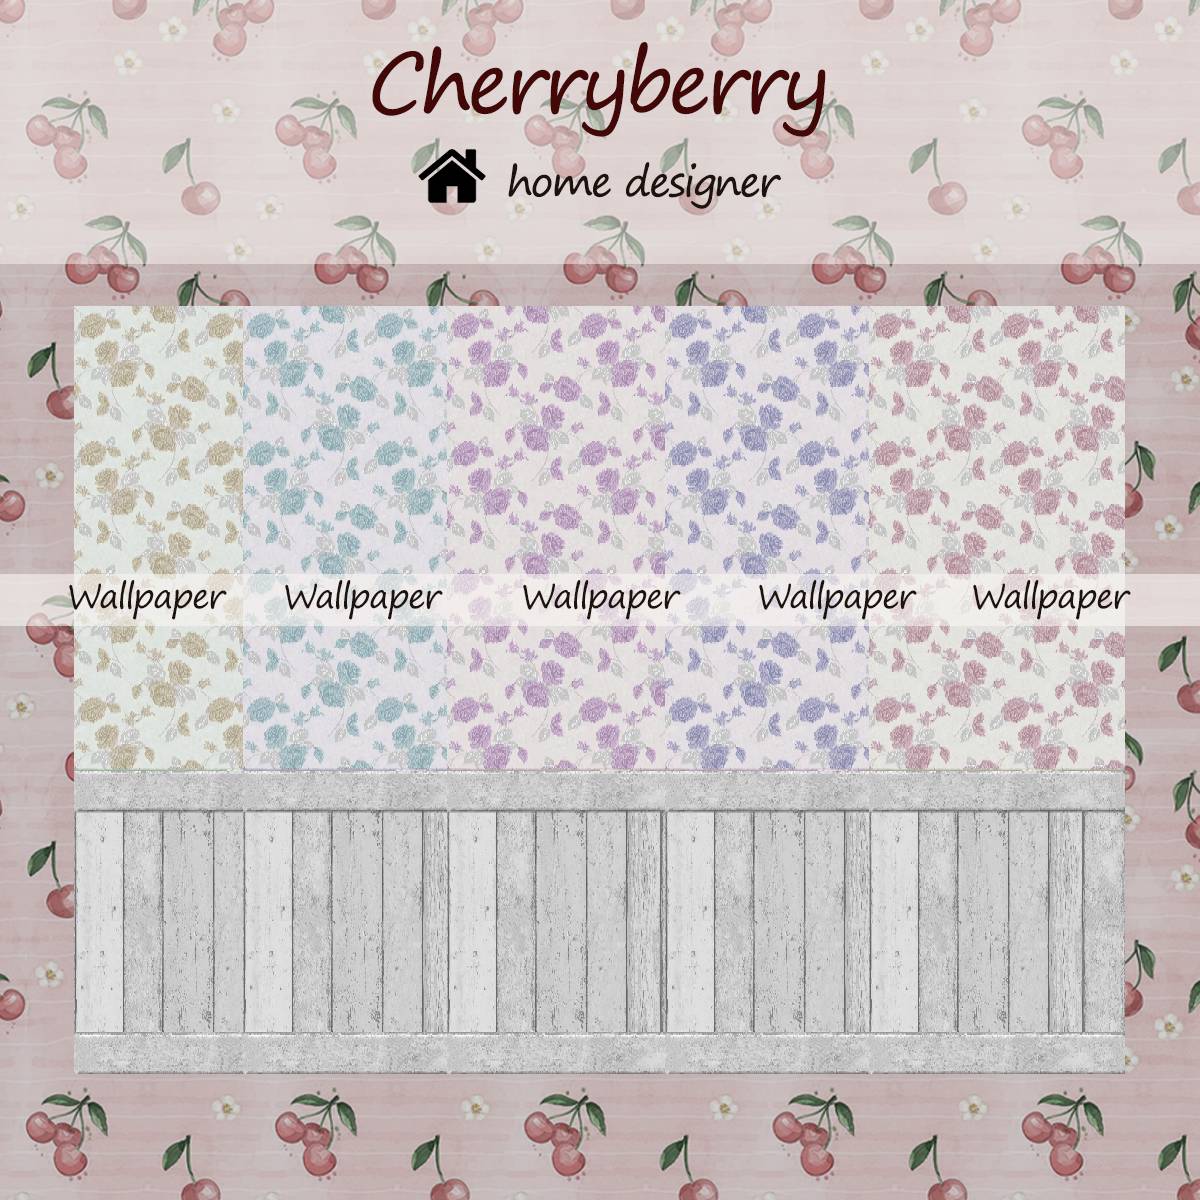 shabbe_floral wallpappers